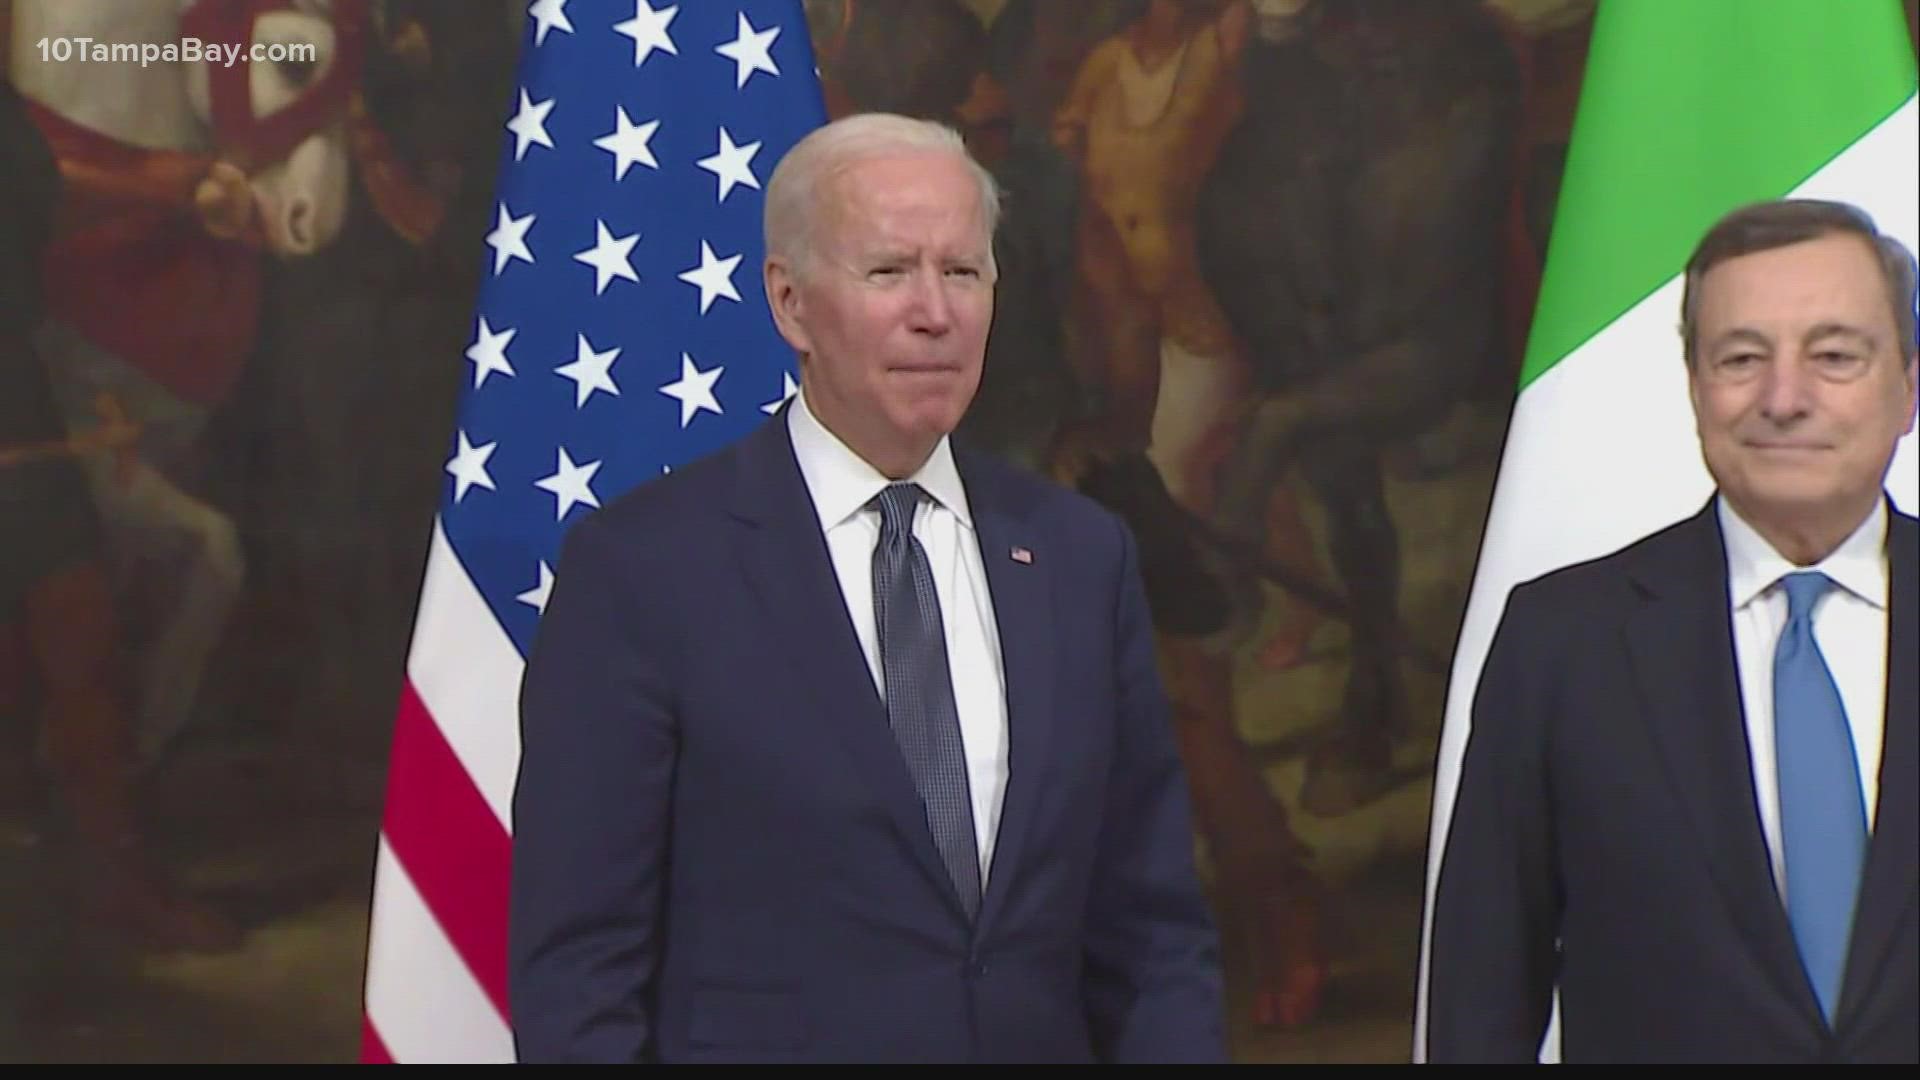 Biden is the second Catholic president in office following after the late John F. Kennedy (JFK) who was recognized as being devoted to his religion.